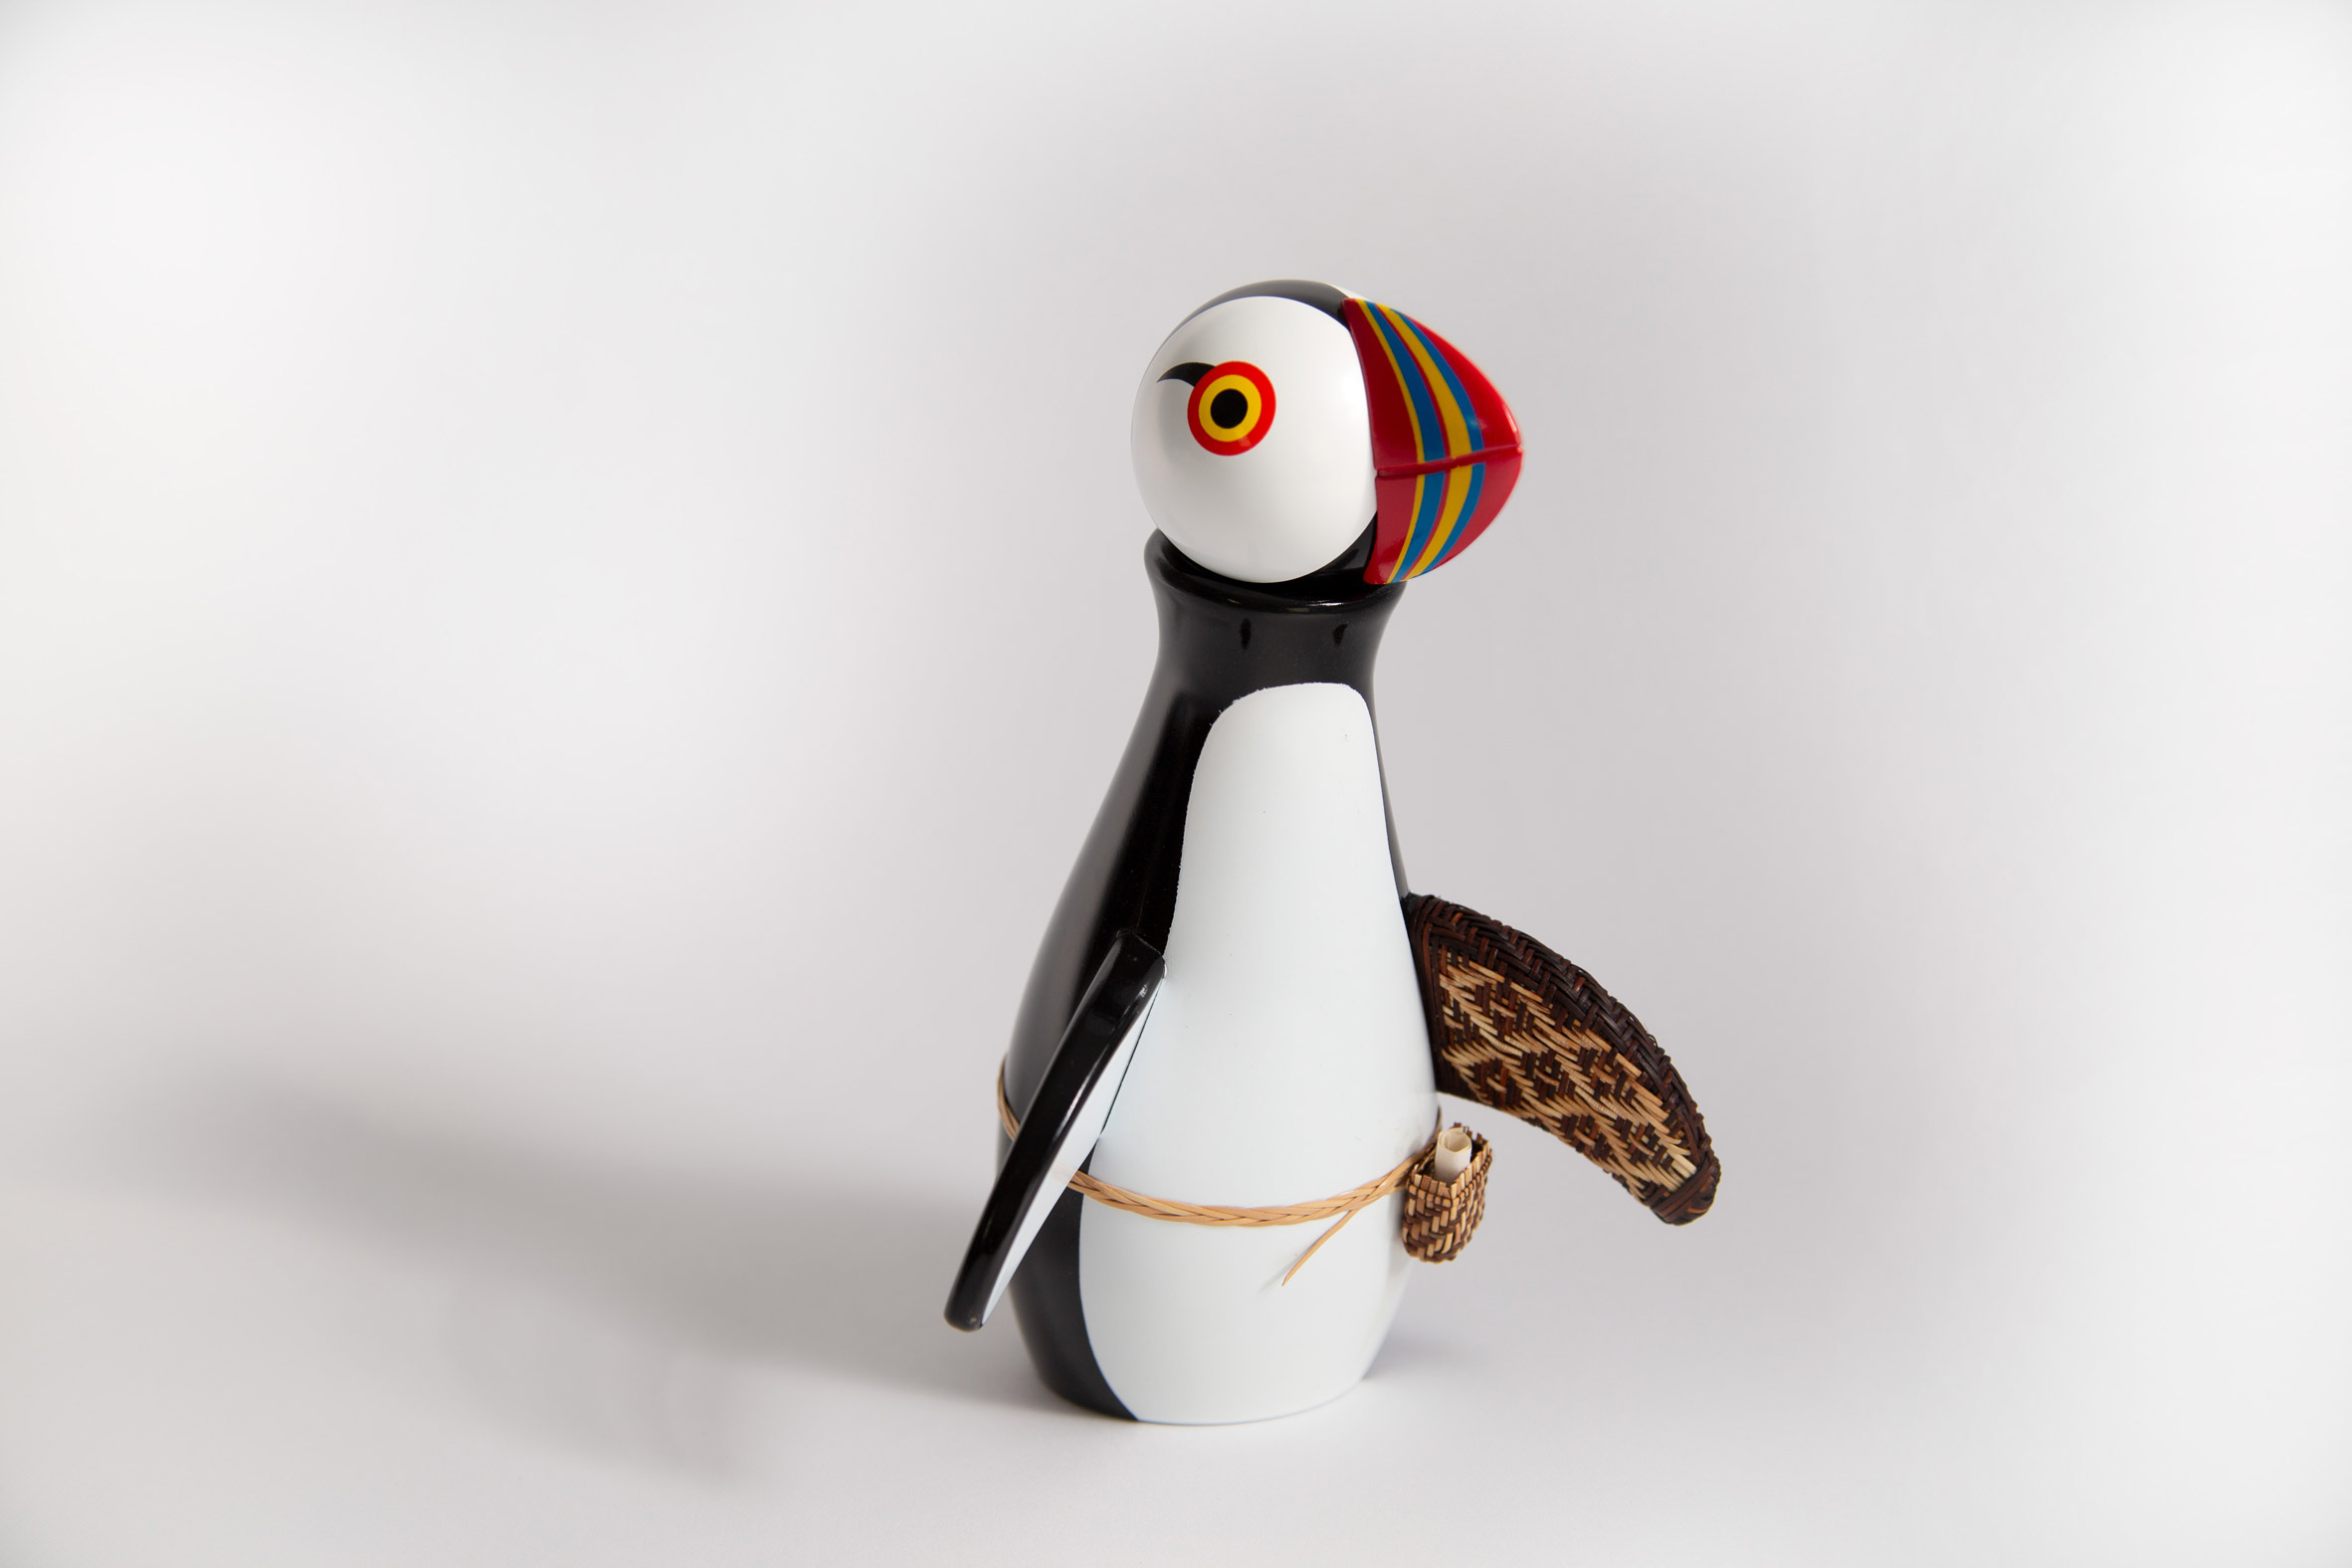 Repaired toy puffin